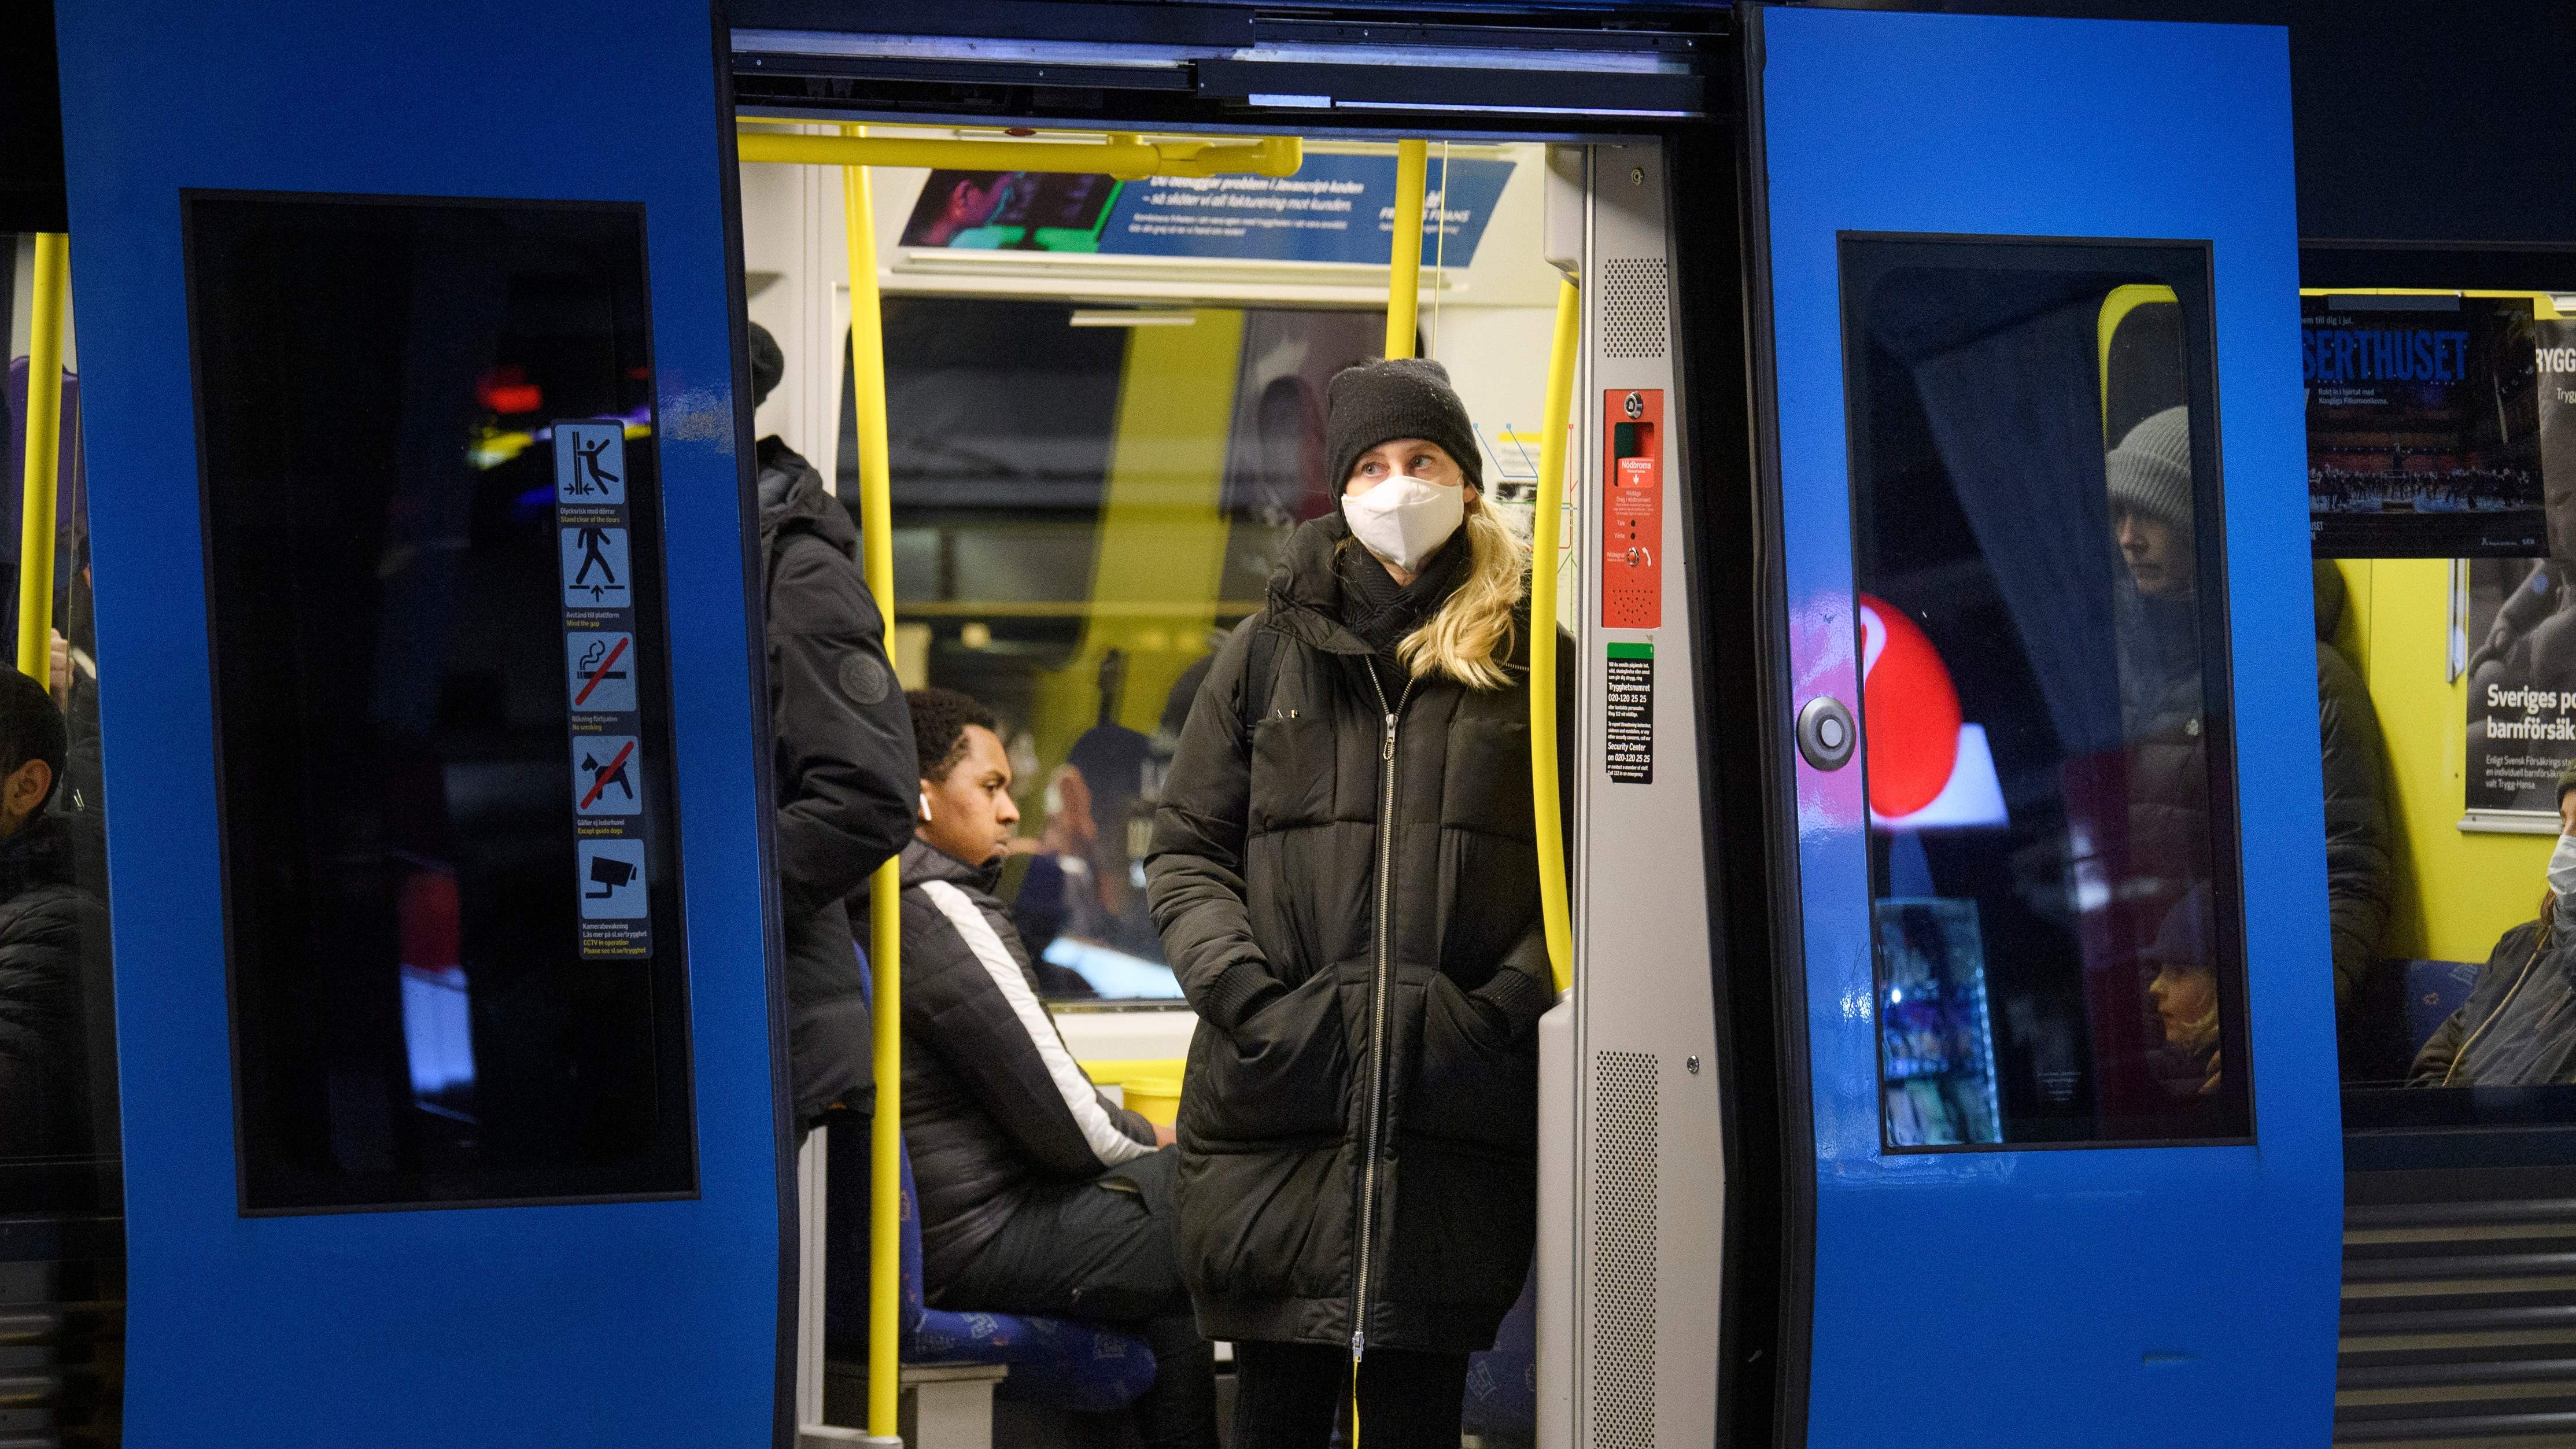 A passenger wearing a face mask on a subway train in Stockholm